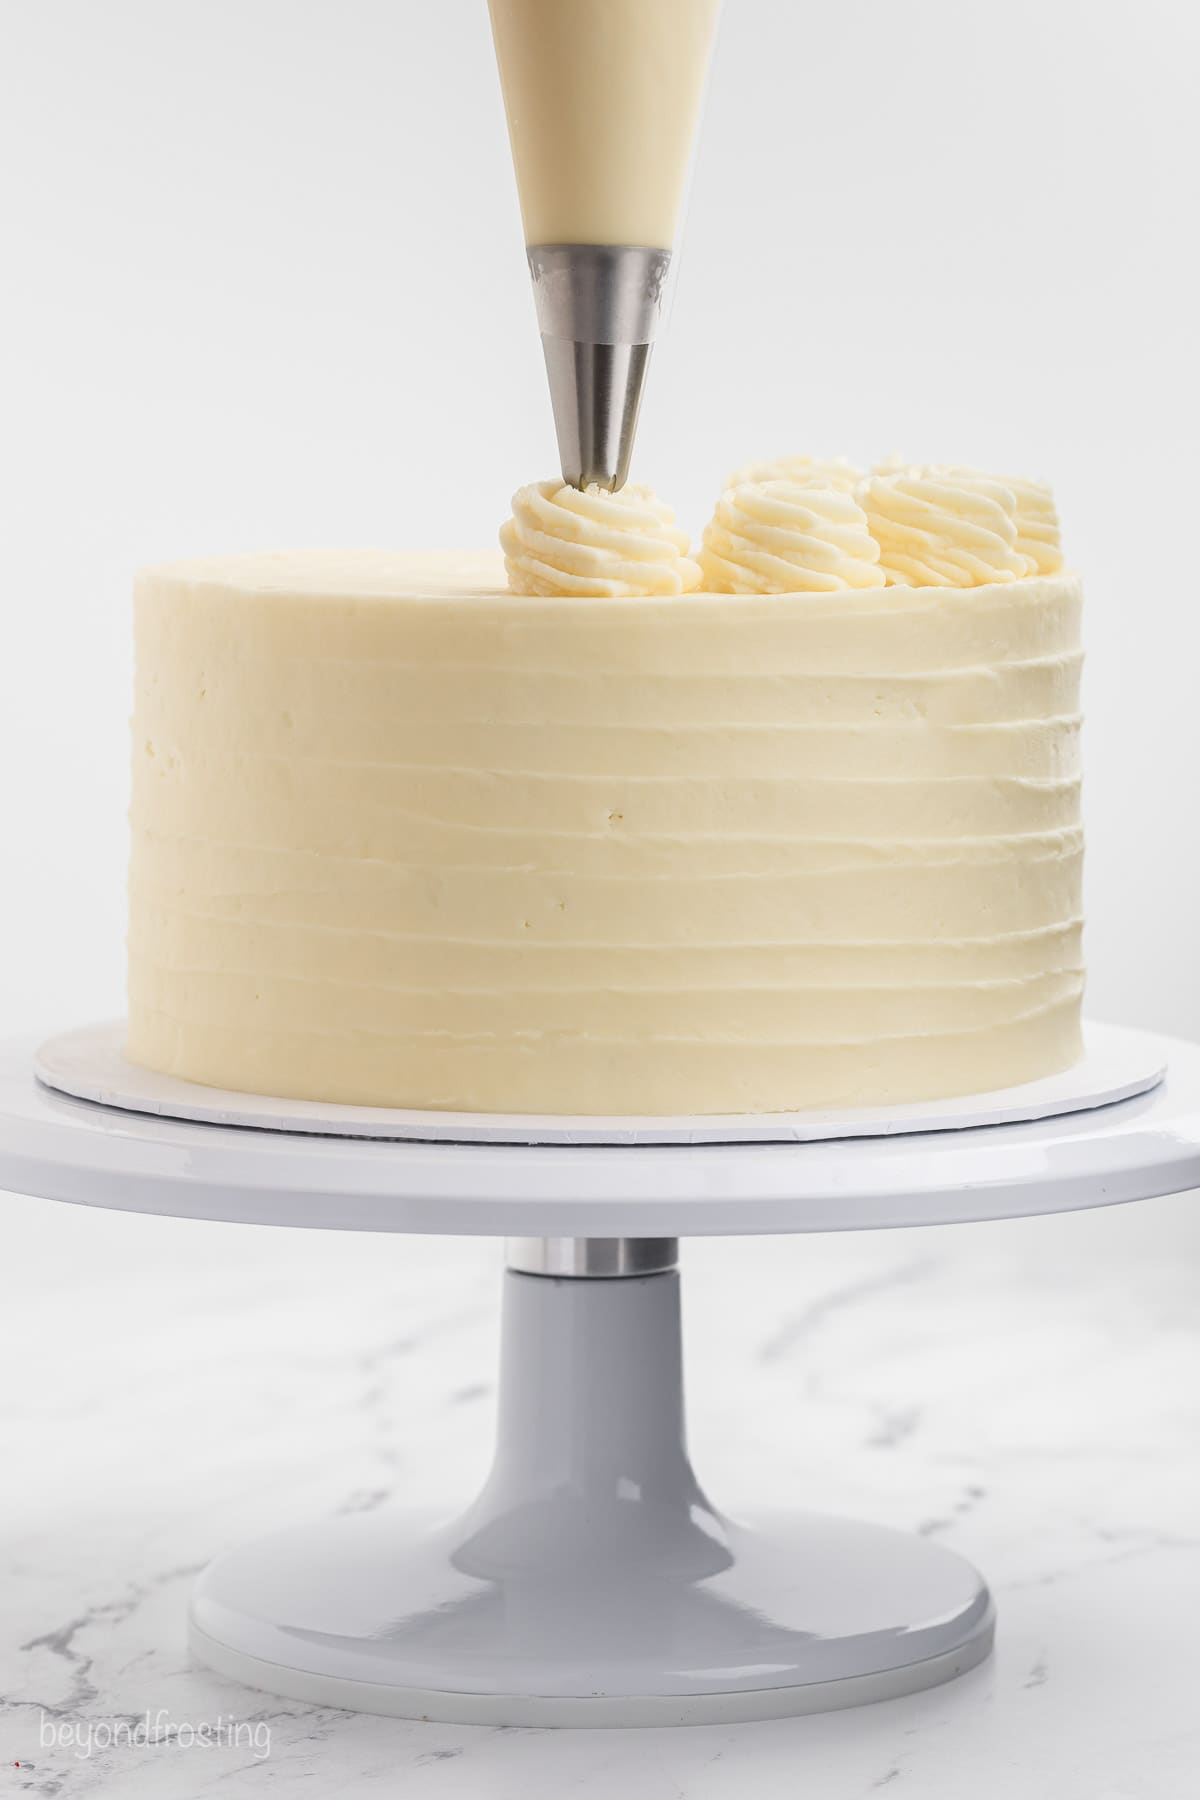 A piping bag pipes swirls of cream cheese frosting over a frosted red velvet layer cake on a cake stand.